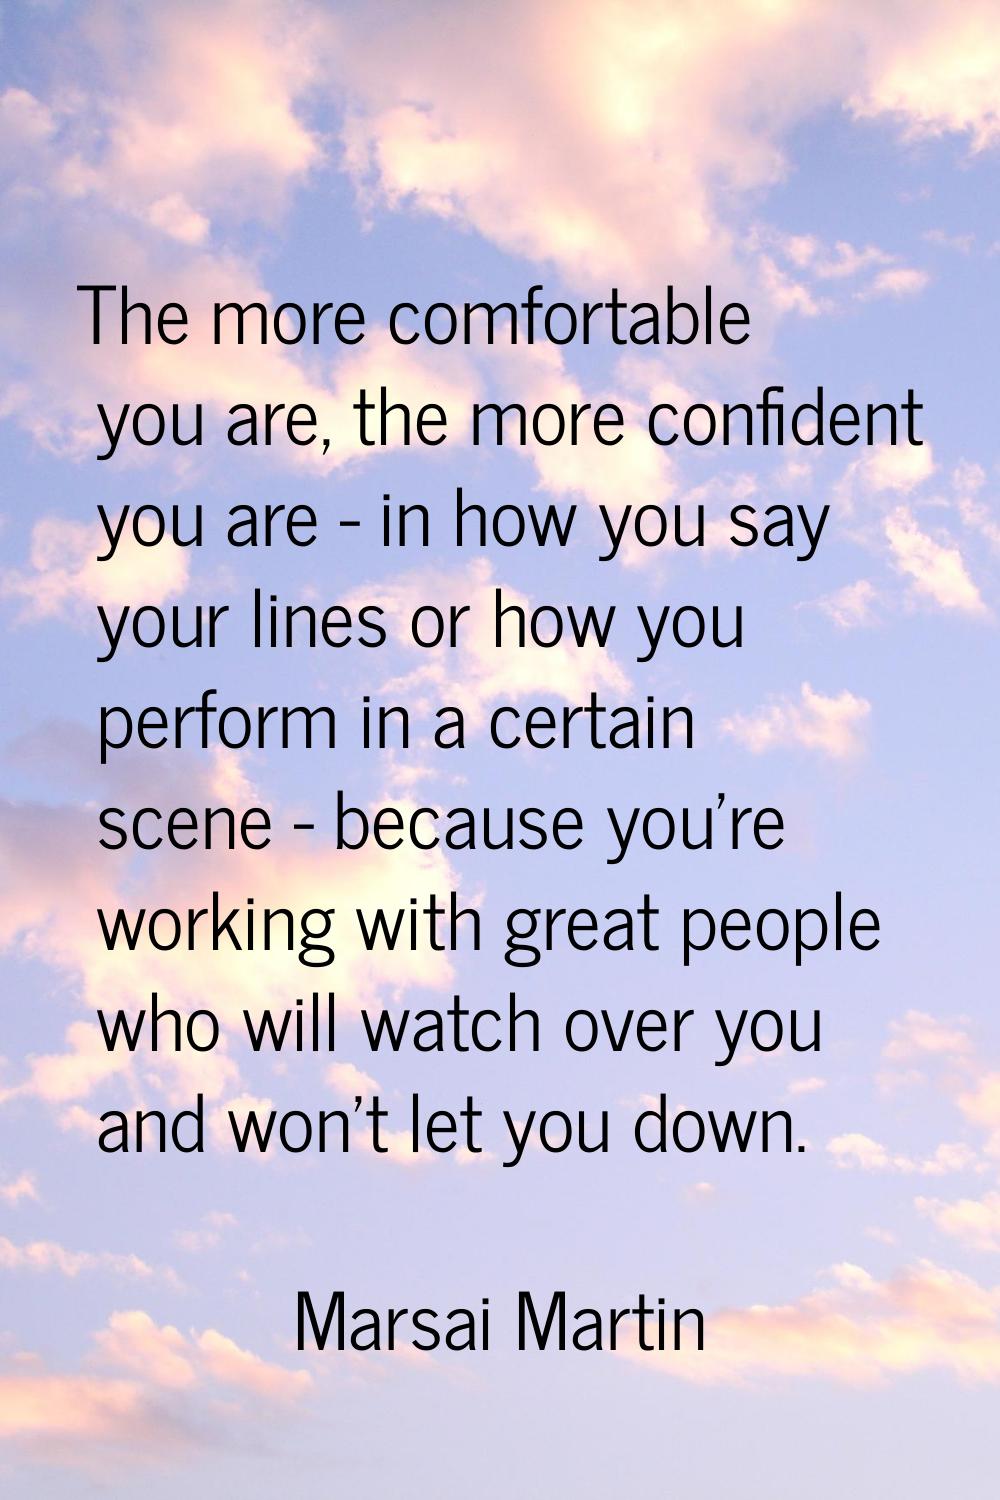 The more comfortable you are, the more confident you are - in how you say your lines or how you per